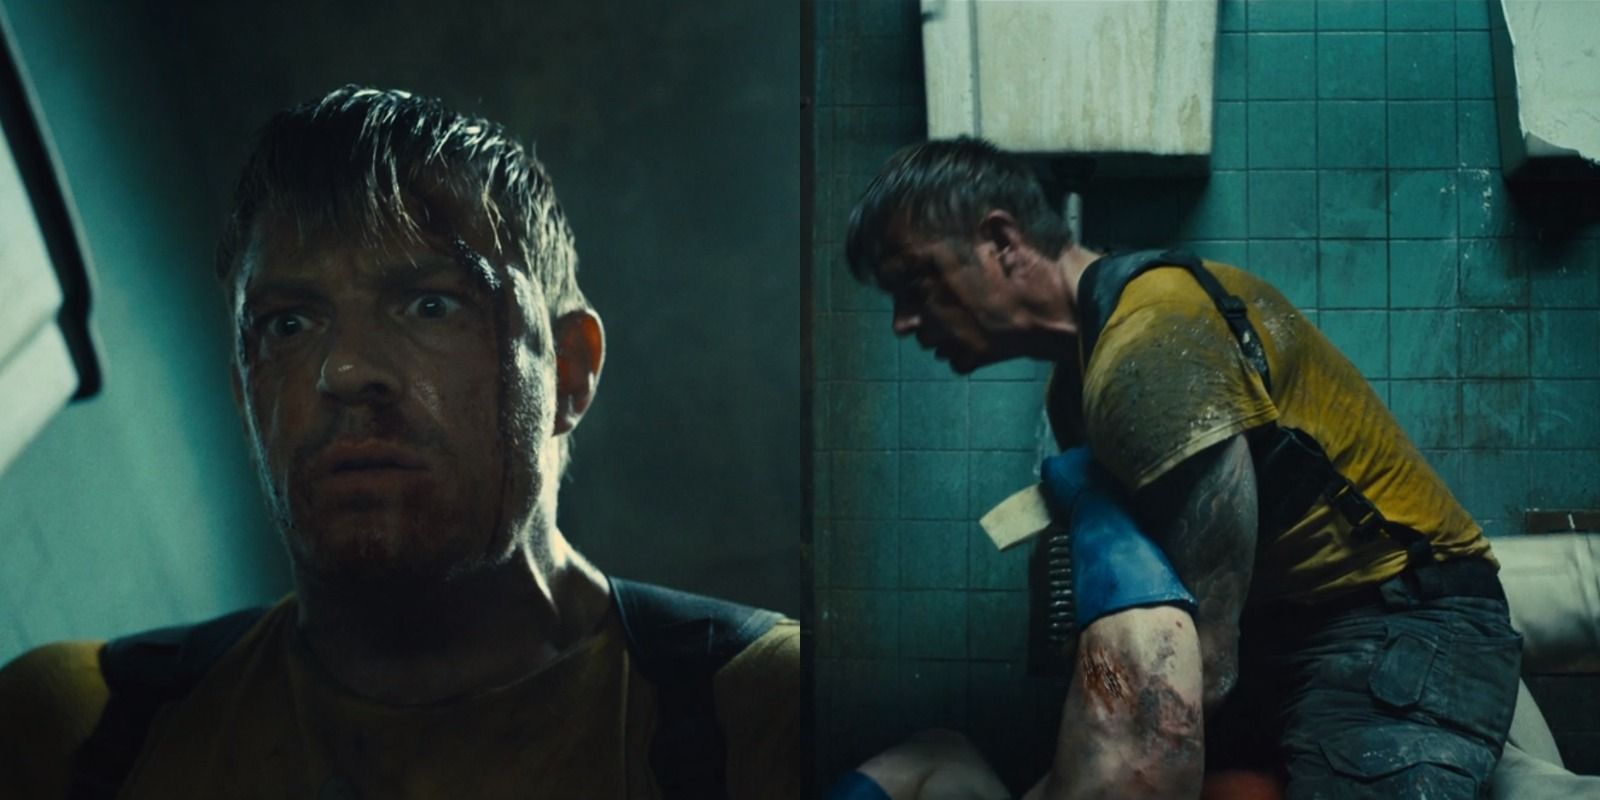 Side-by-side view of Rick Flag being stabbed by Peacemaker in James Gunn's The Suicide Squad